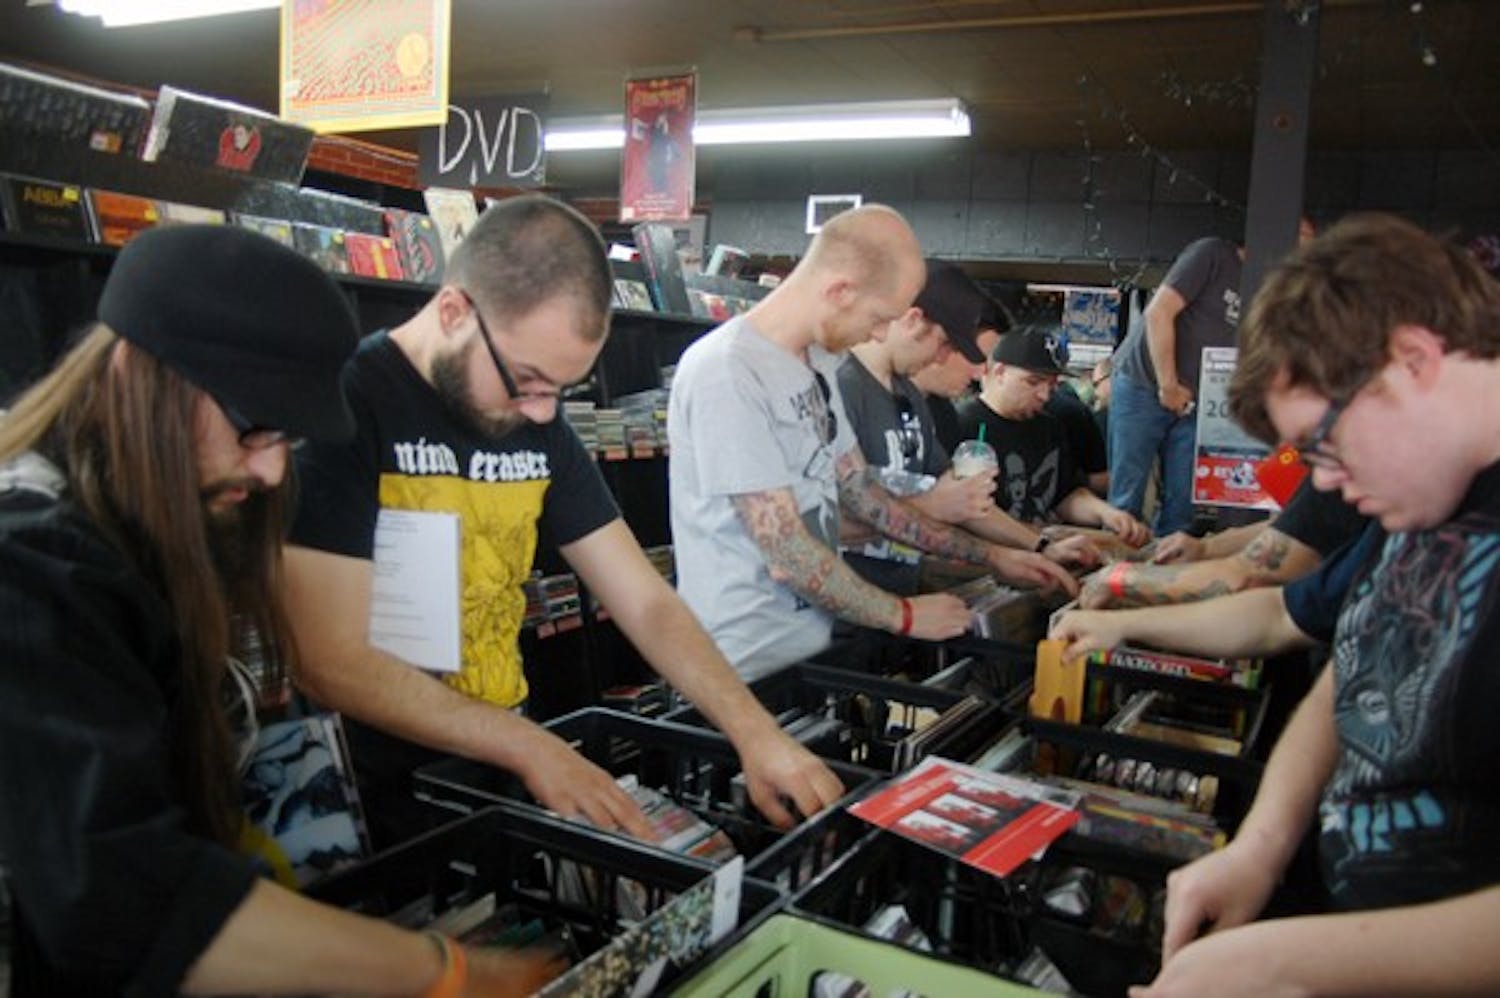 Customers at Revolver Records peruse the store on Record Store Day. (Photo courtesy Taylor Costello)